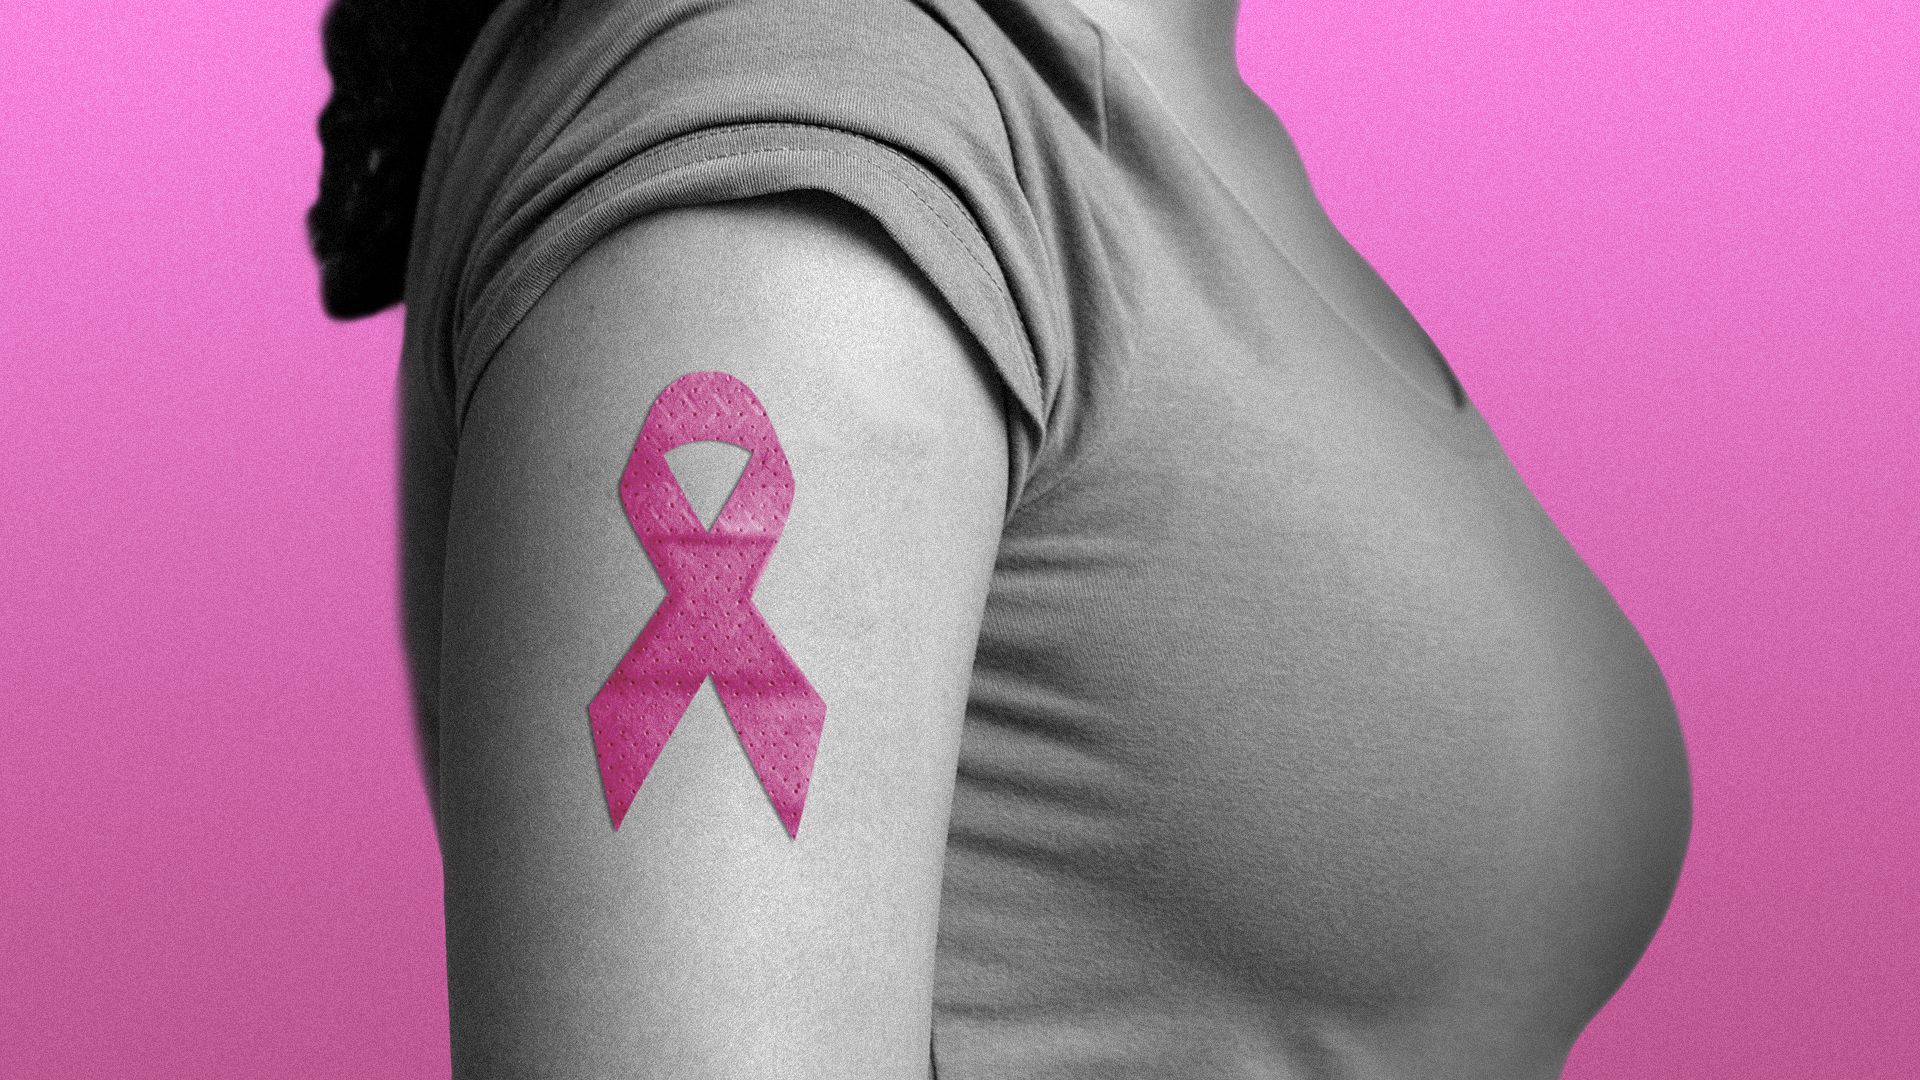 Illustration of a pink bandaid shaped like a ribbon on a woman's arms.